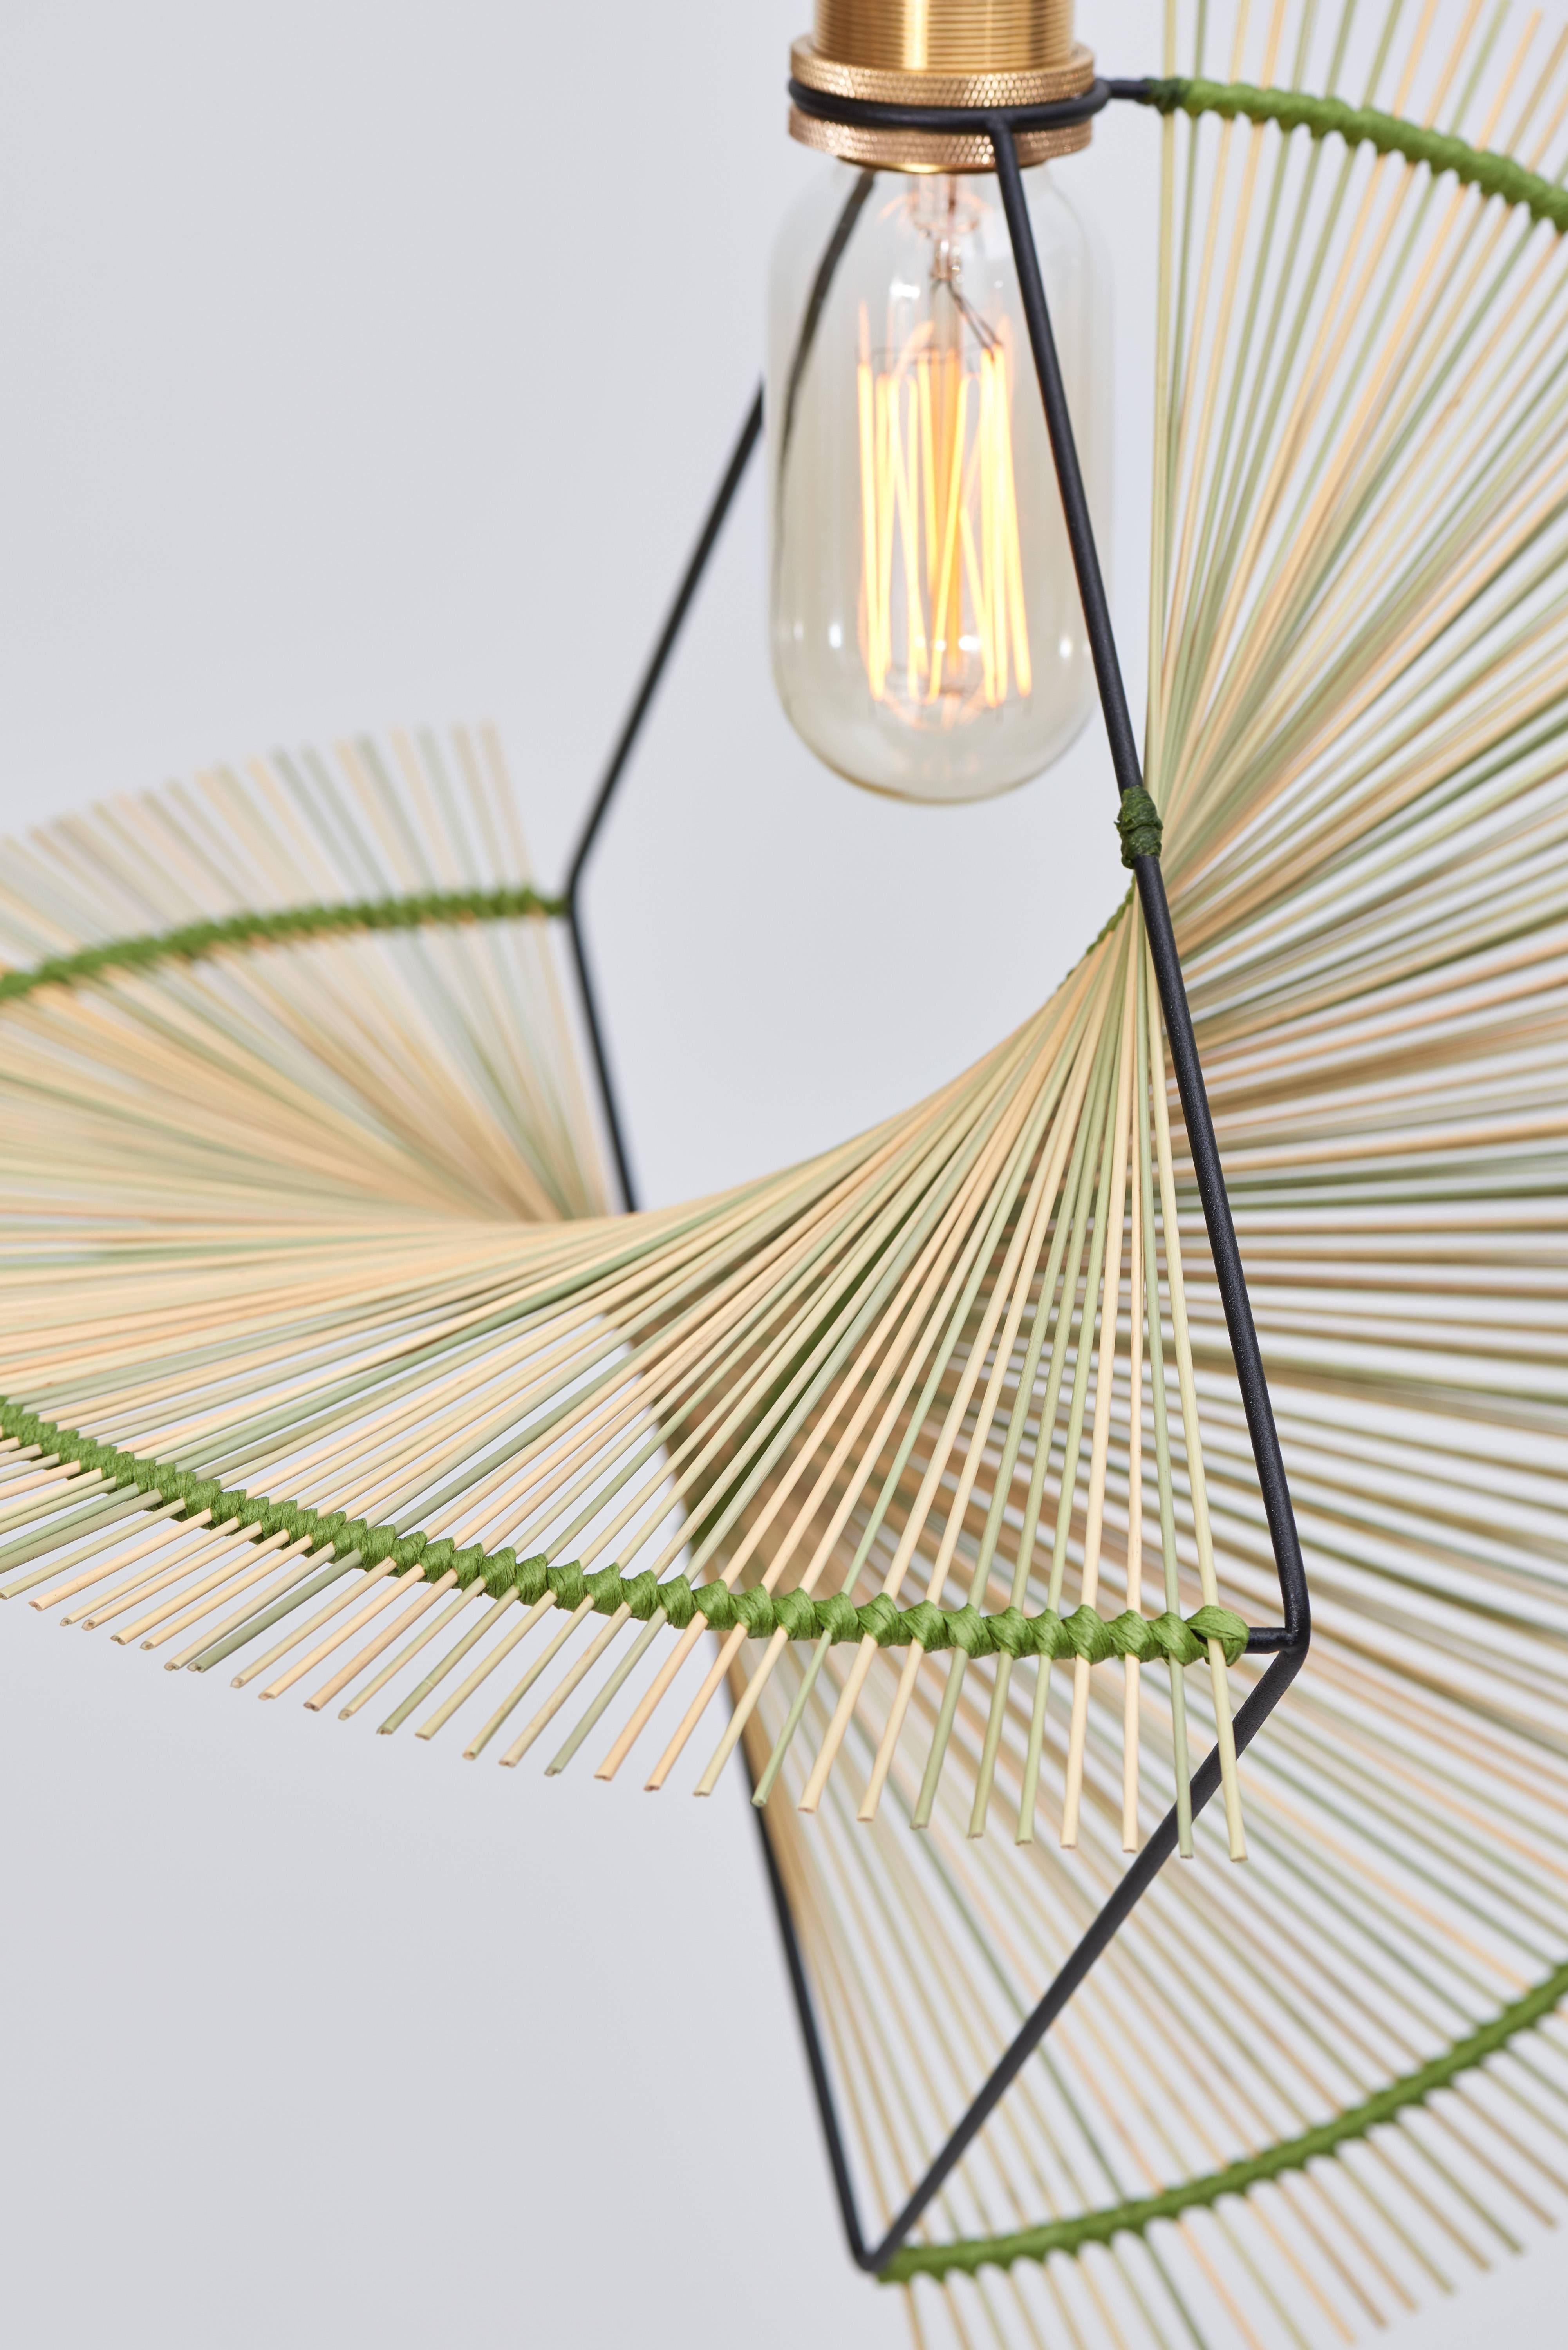 Ryar light
Umbrella sedge,
Powder-coated steel
Measures: 60 x 58 x 58 cm
Light bulb included, E27 40W 220V.
Supplied with 250cm black fabric cable.
Wall fixings not included.

Ryar means ocean in the Pangcah language, this is a pendant light